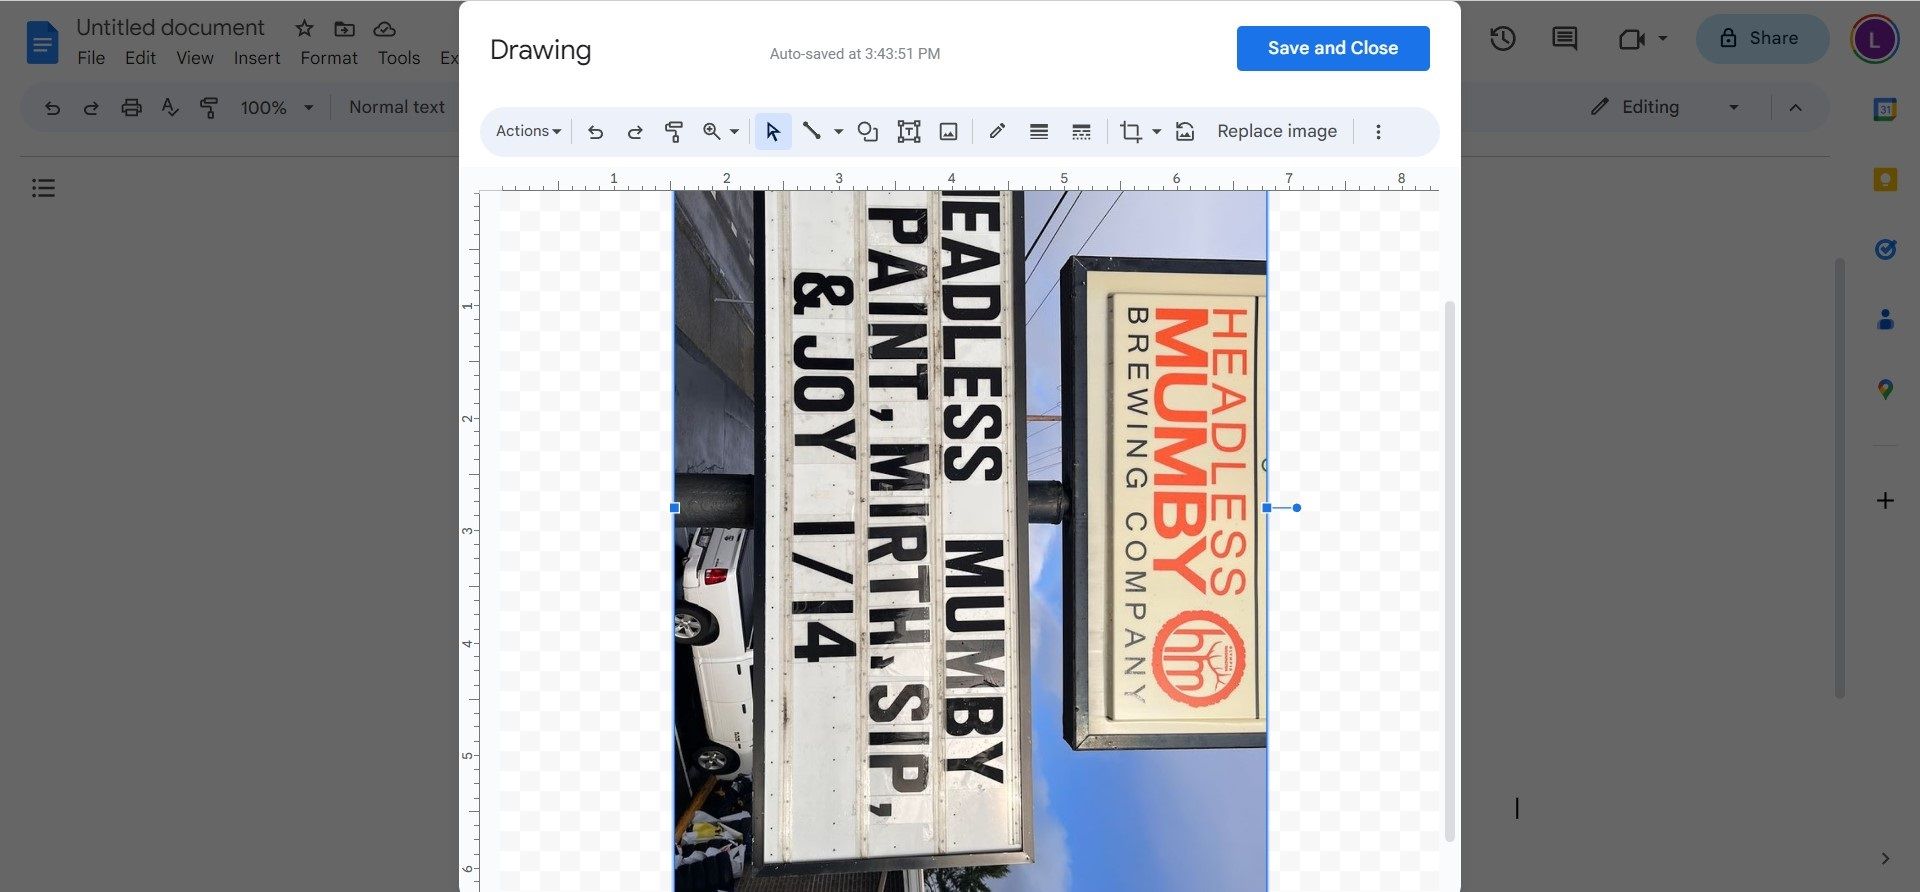 Screenshot shows a rotated image in Google Docs.